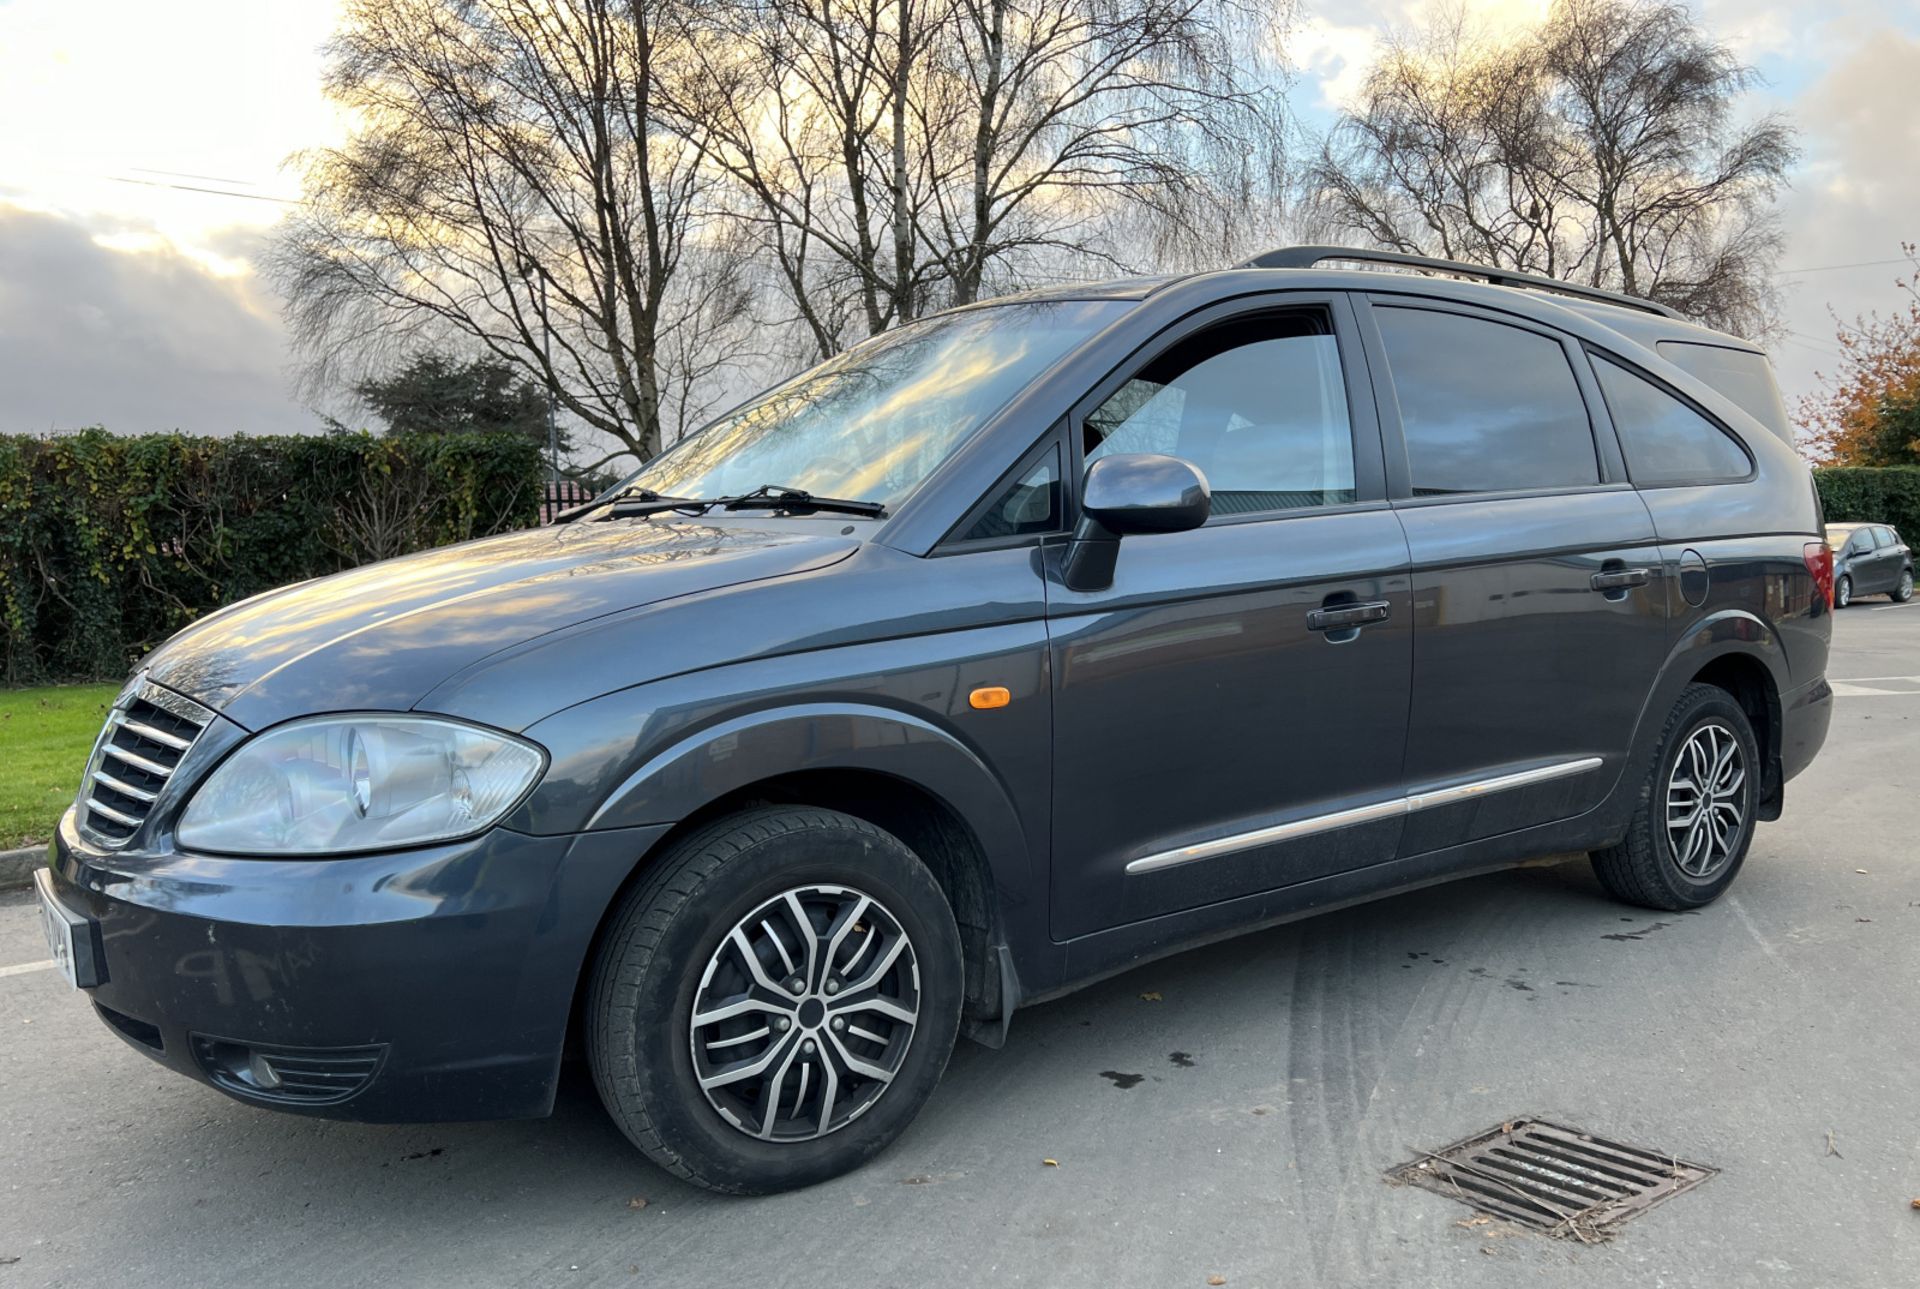 Ssangyong Rodius 7 seater - 2x key fobs - 2.7l Mercedes engine - see description